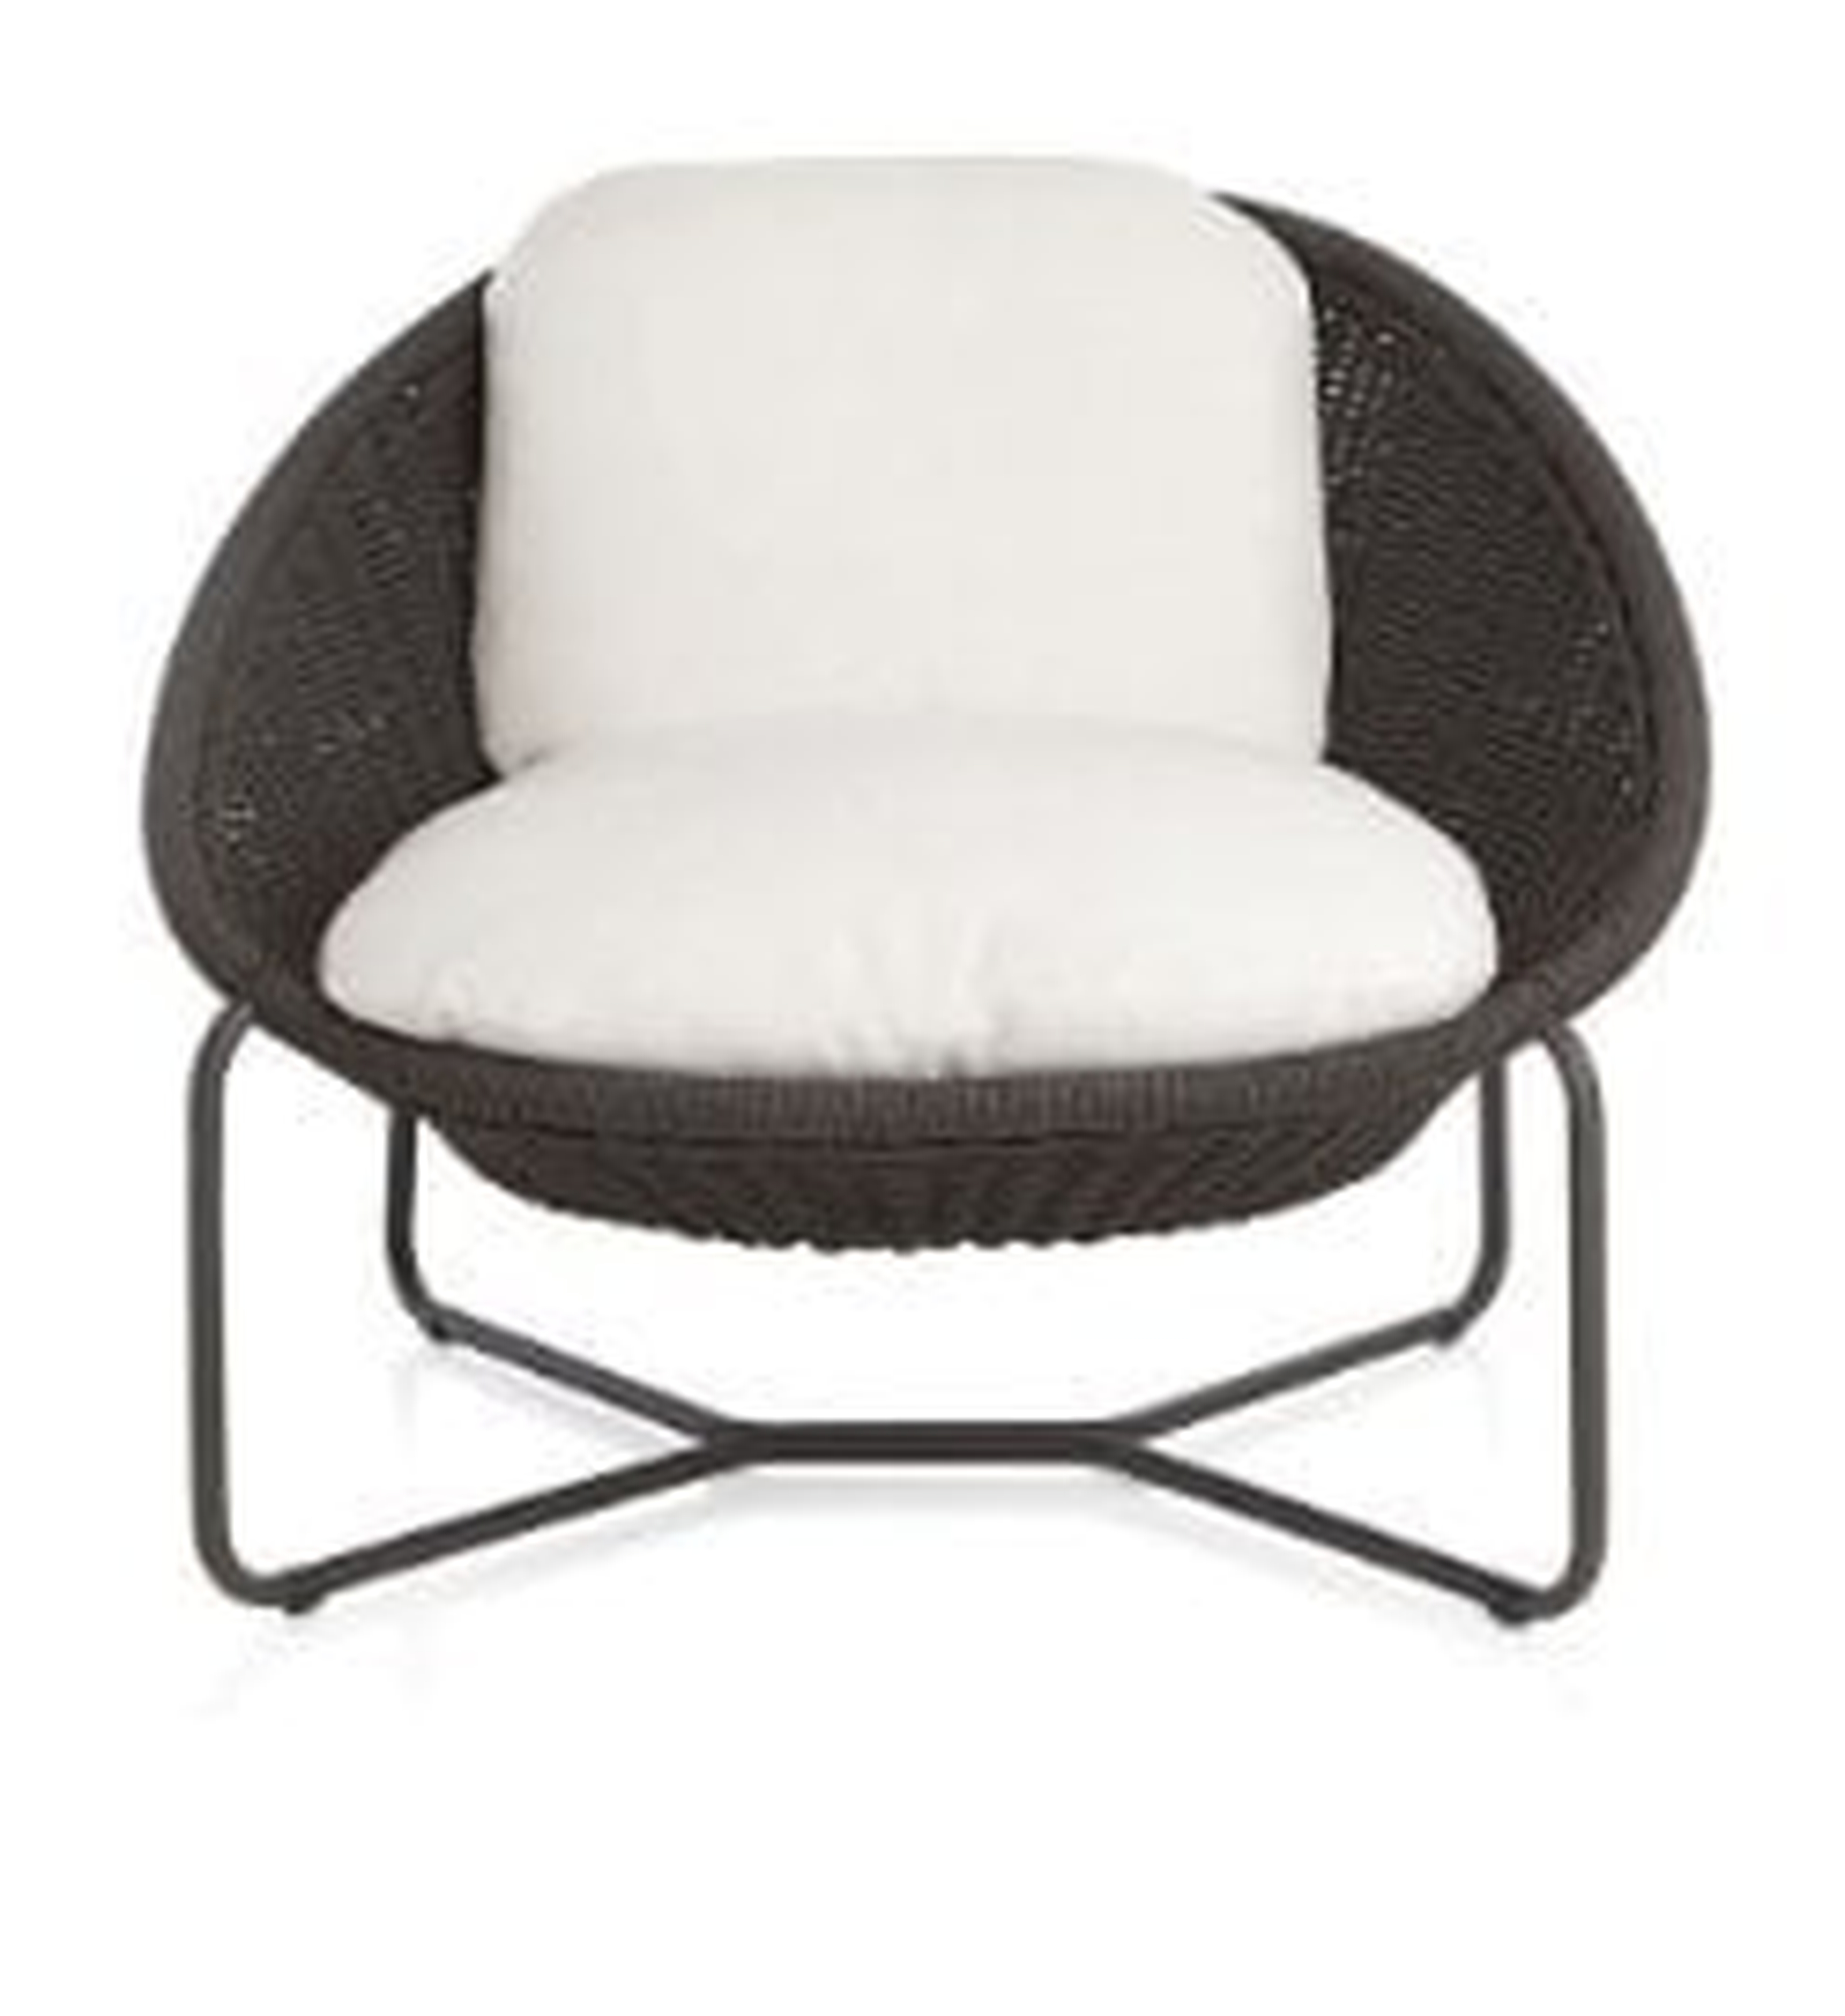 Morocco Graphite Oval Lounge Chair with Cushion - Crate and Barrel